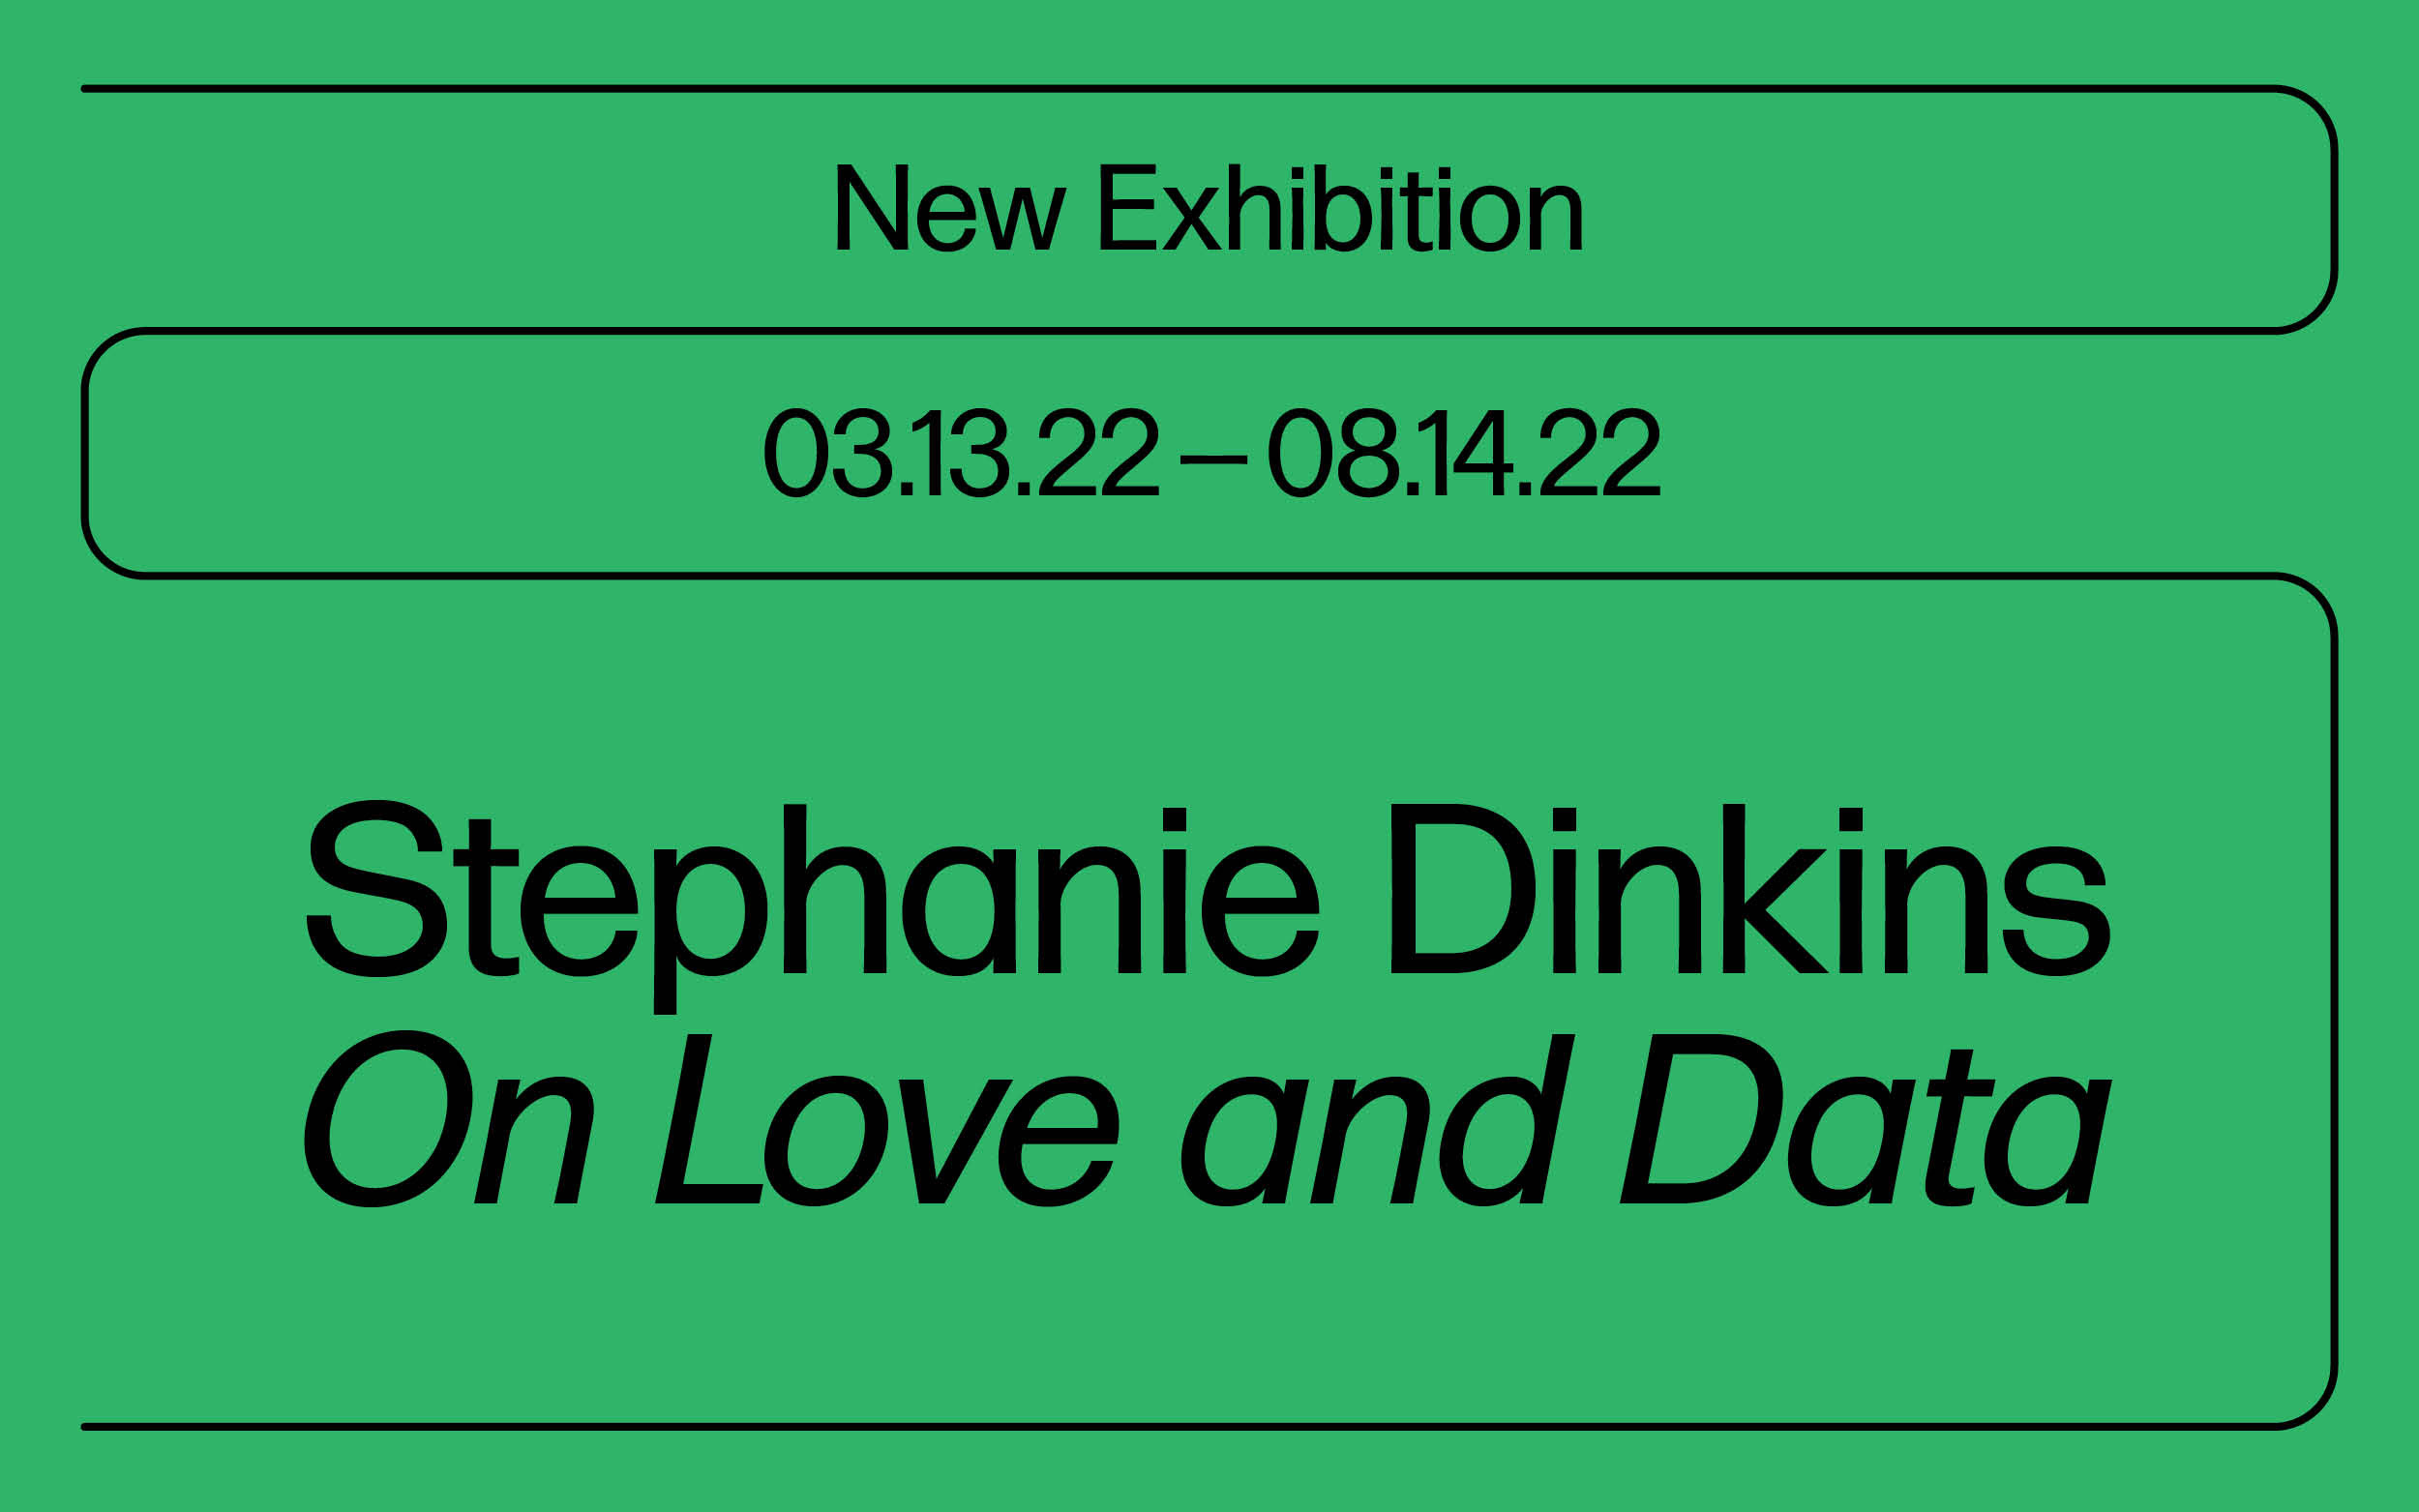 Black text on green background that reads "New Exhibition, 03.13.22 - 08.14.22, Stephanie Dinkins, 'On Love and Data'"